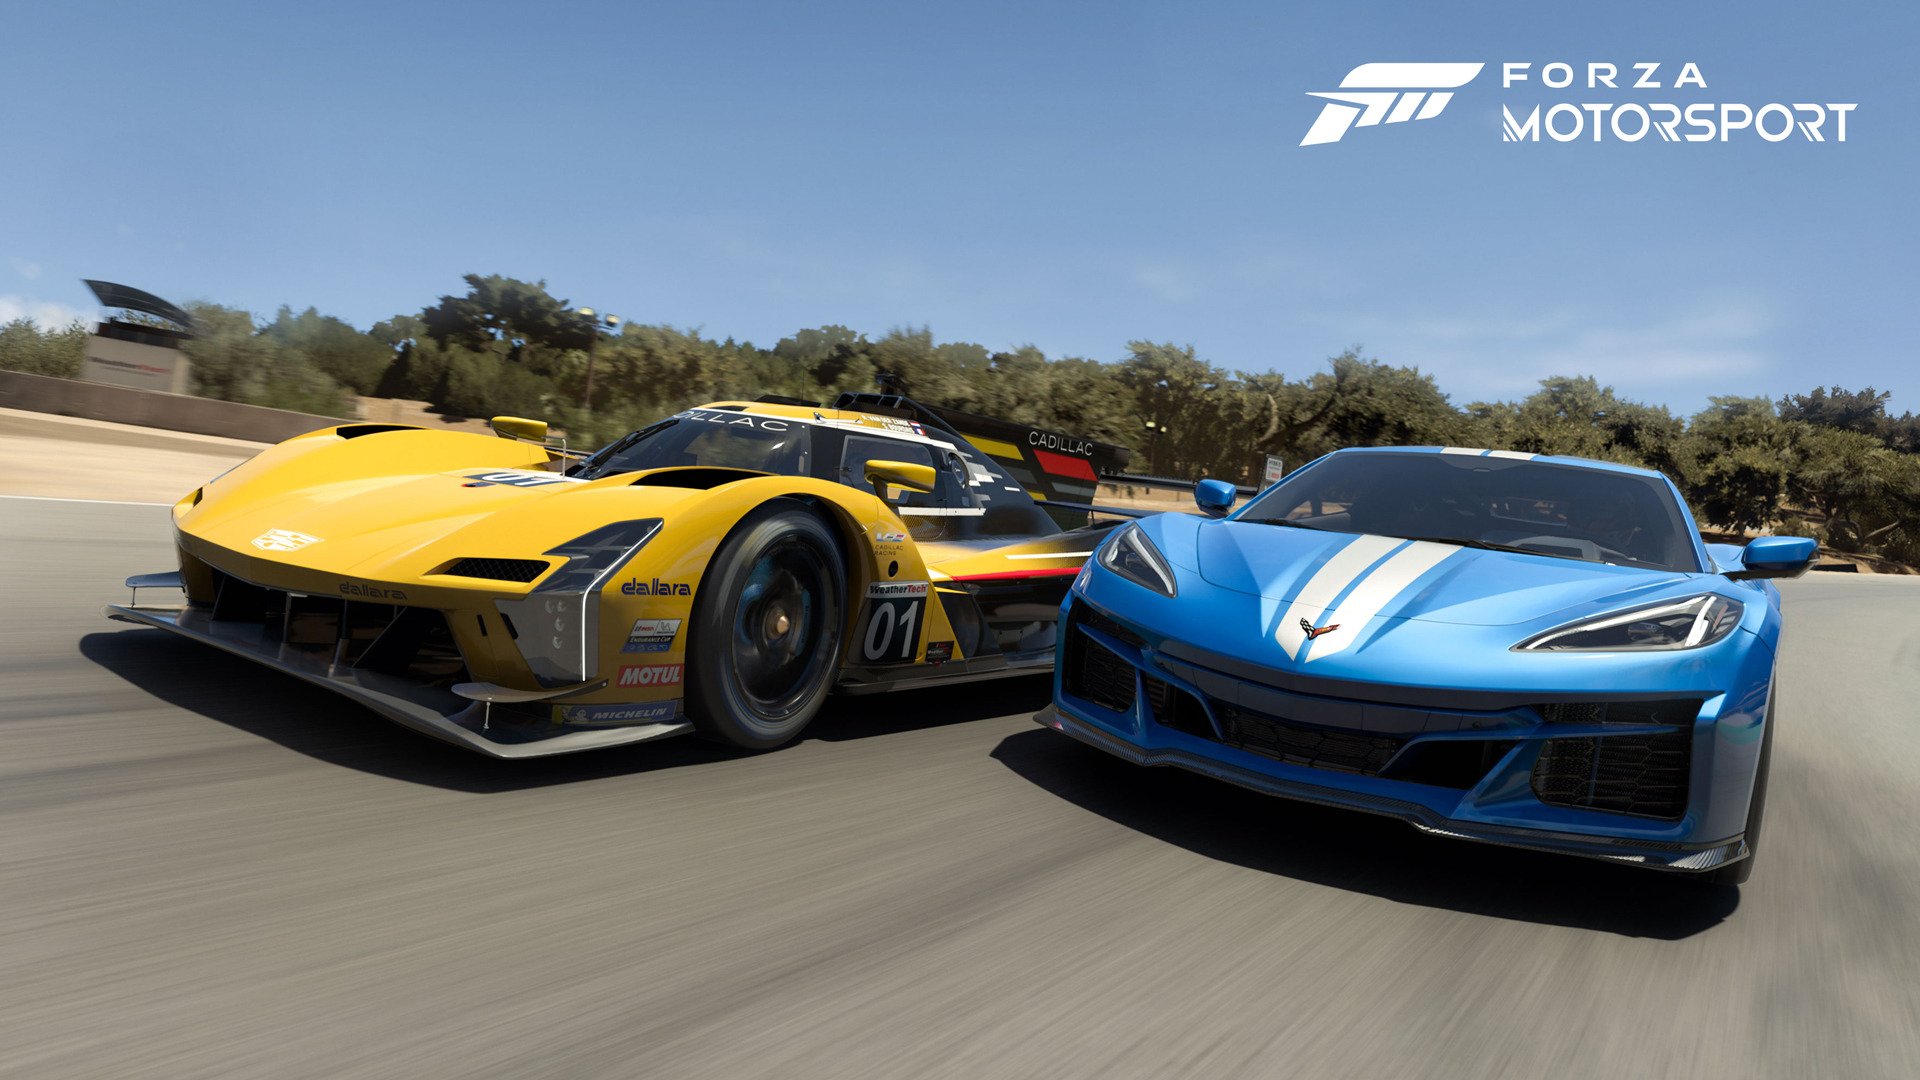 Play Forza Motorsport 6 Today with Ultimate Edition Early Access